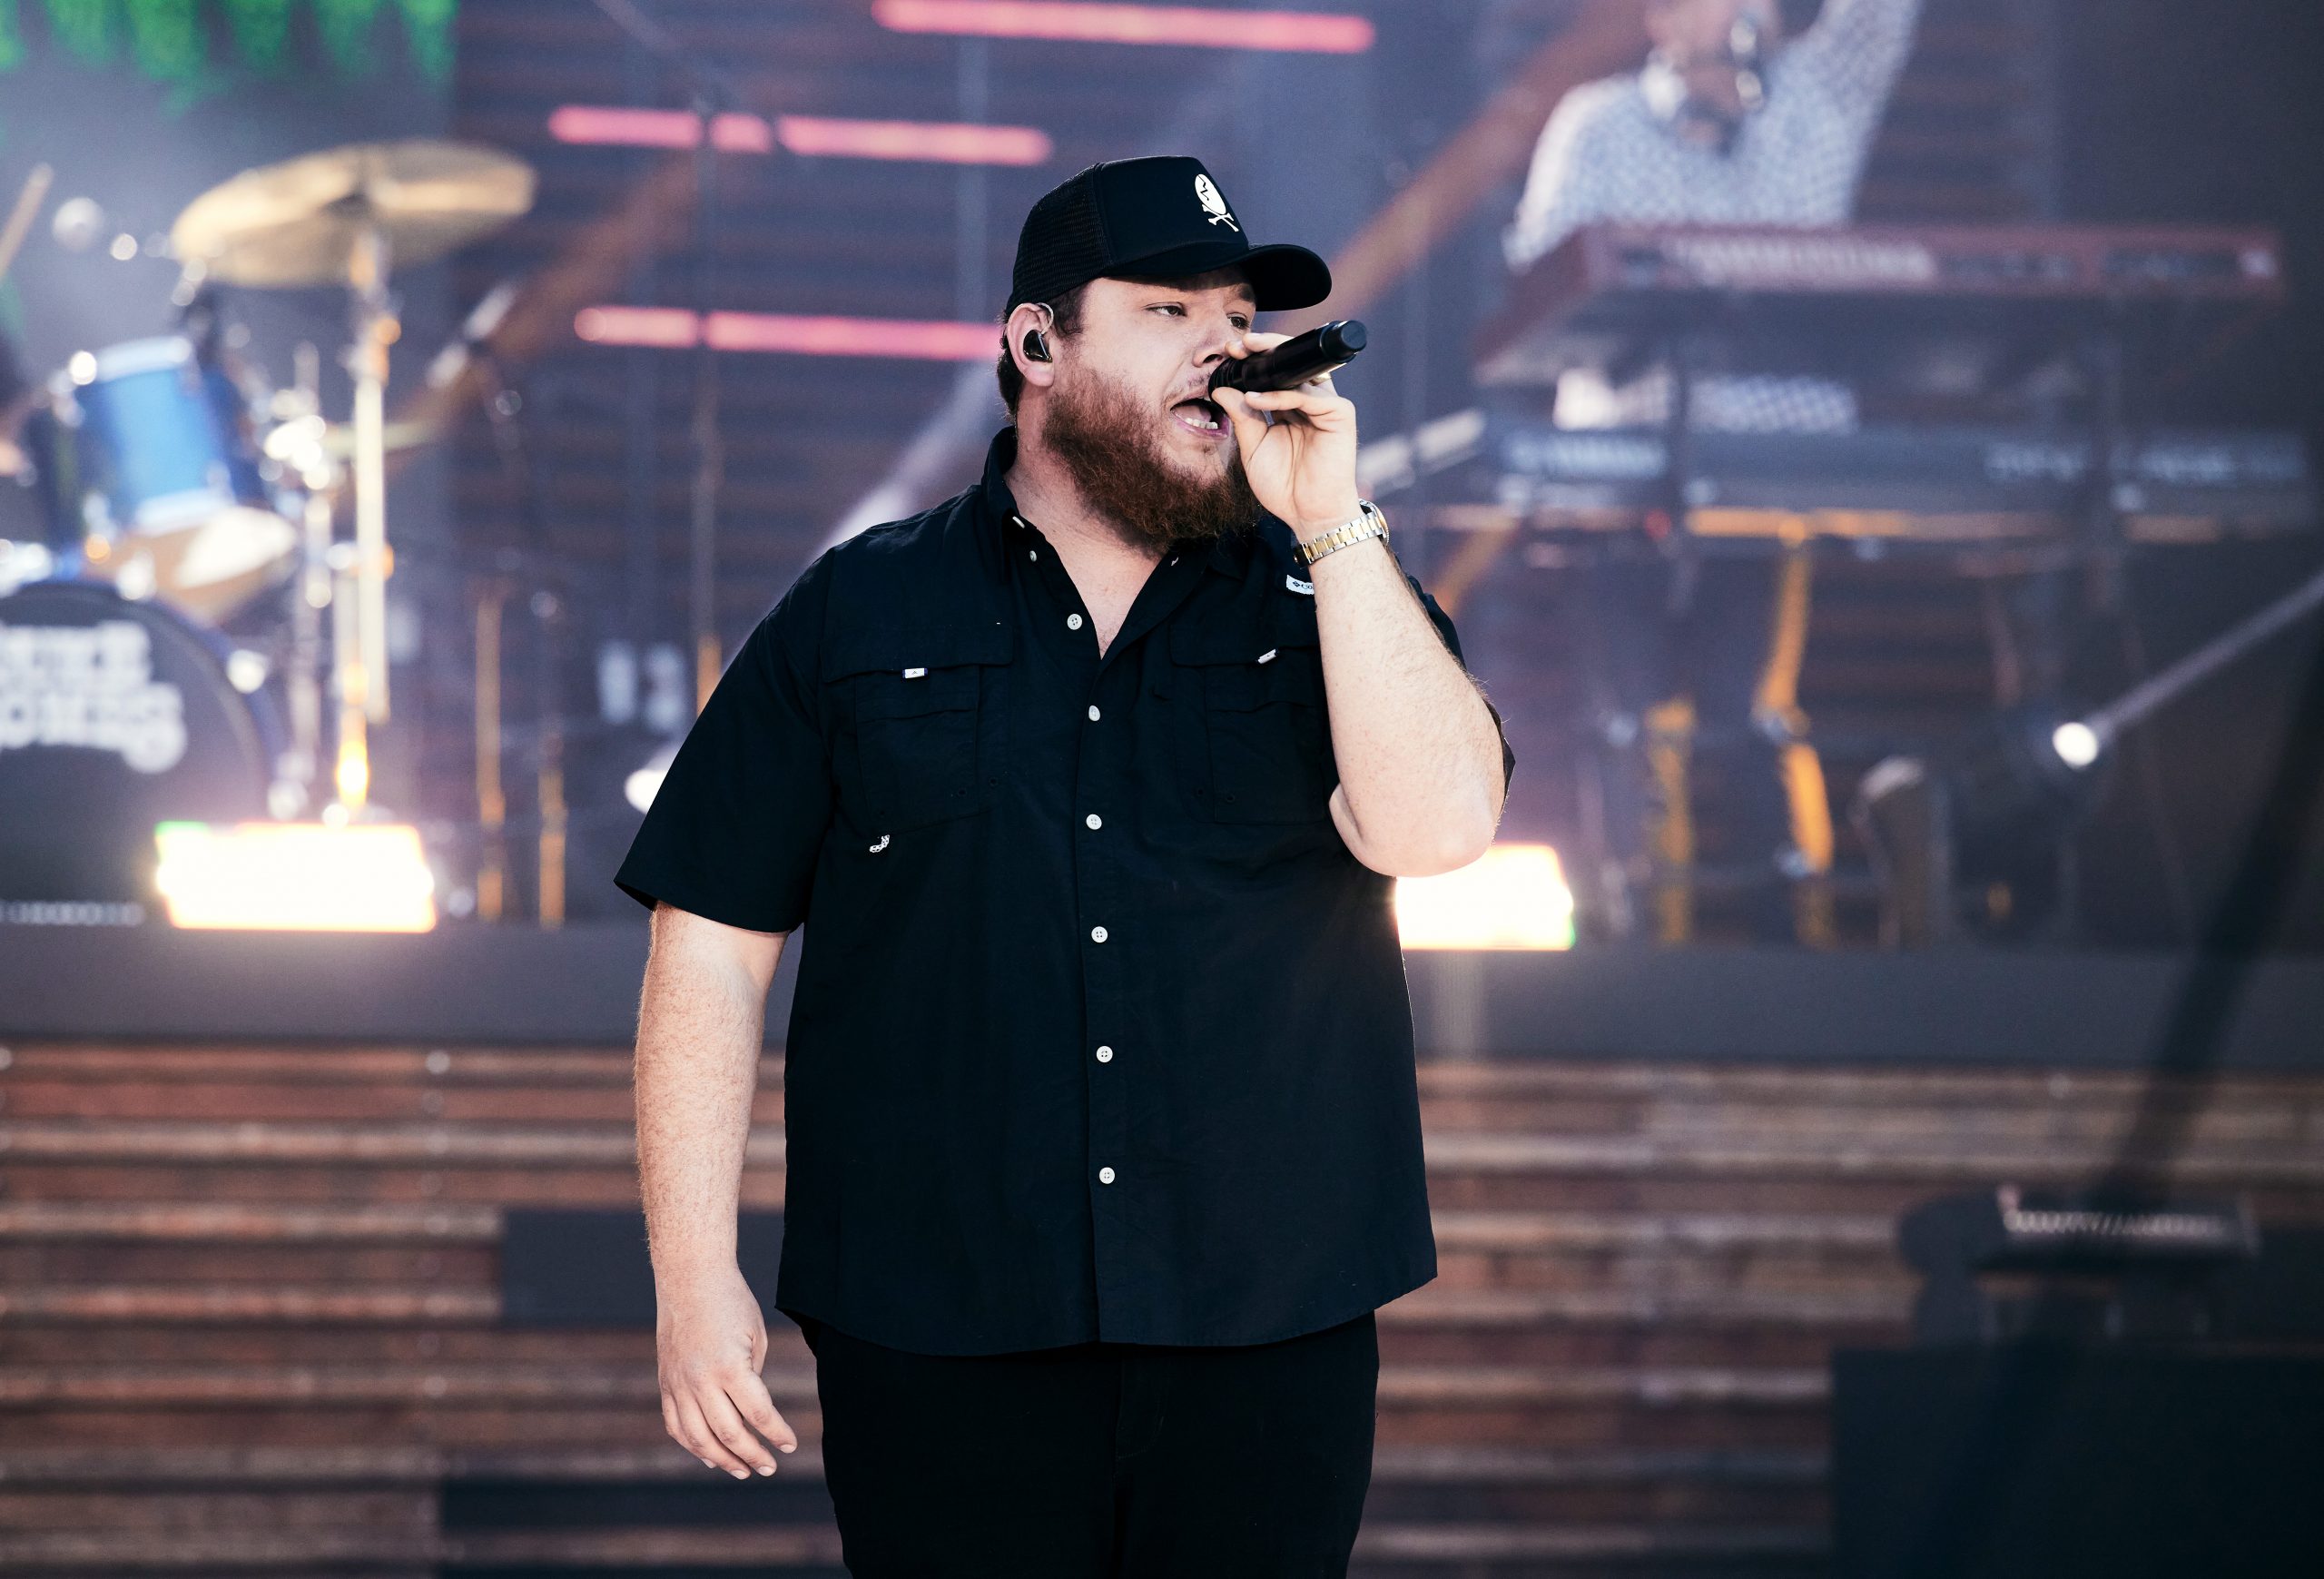 Luke Combs Brings Bold 'Cold As You' to CMT Awards Sounds Like Nashville